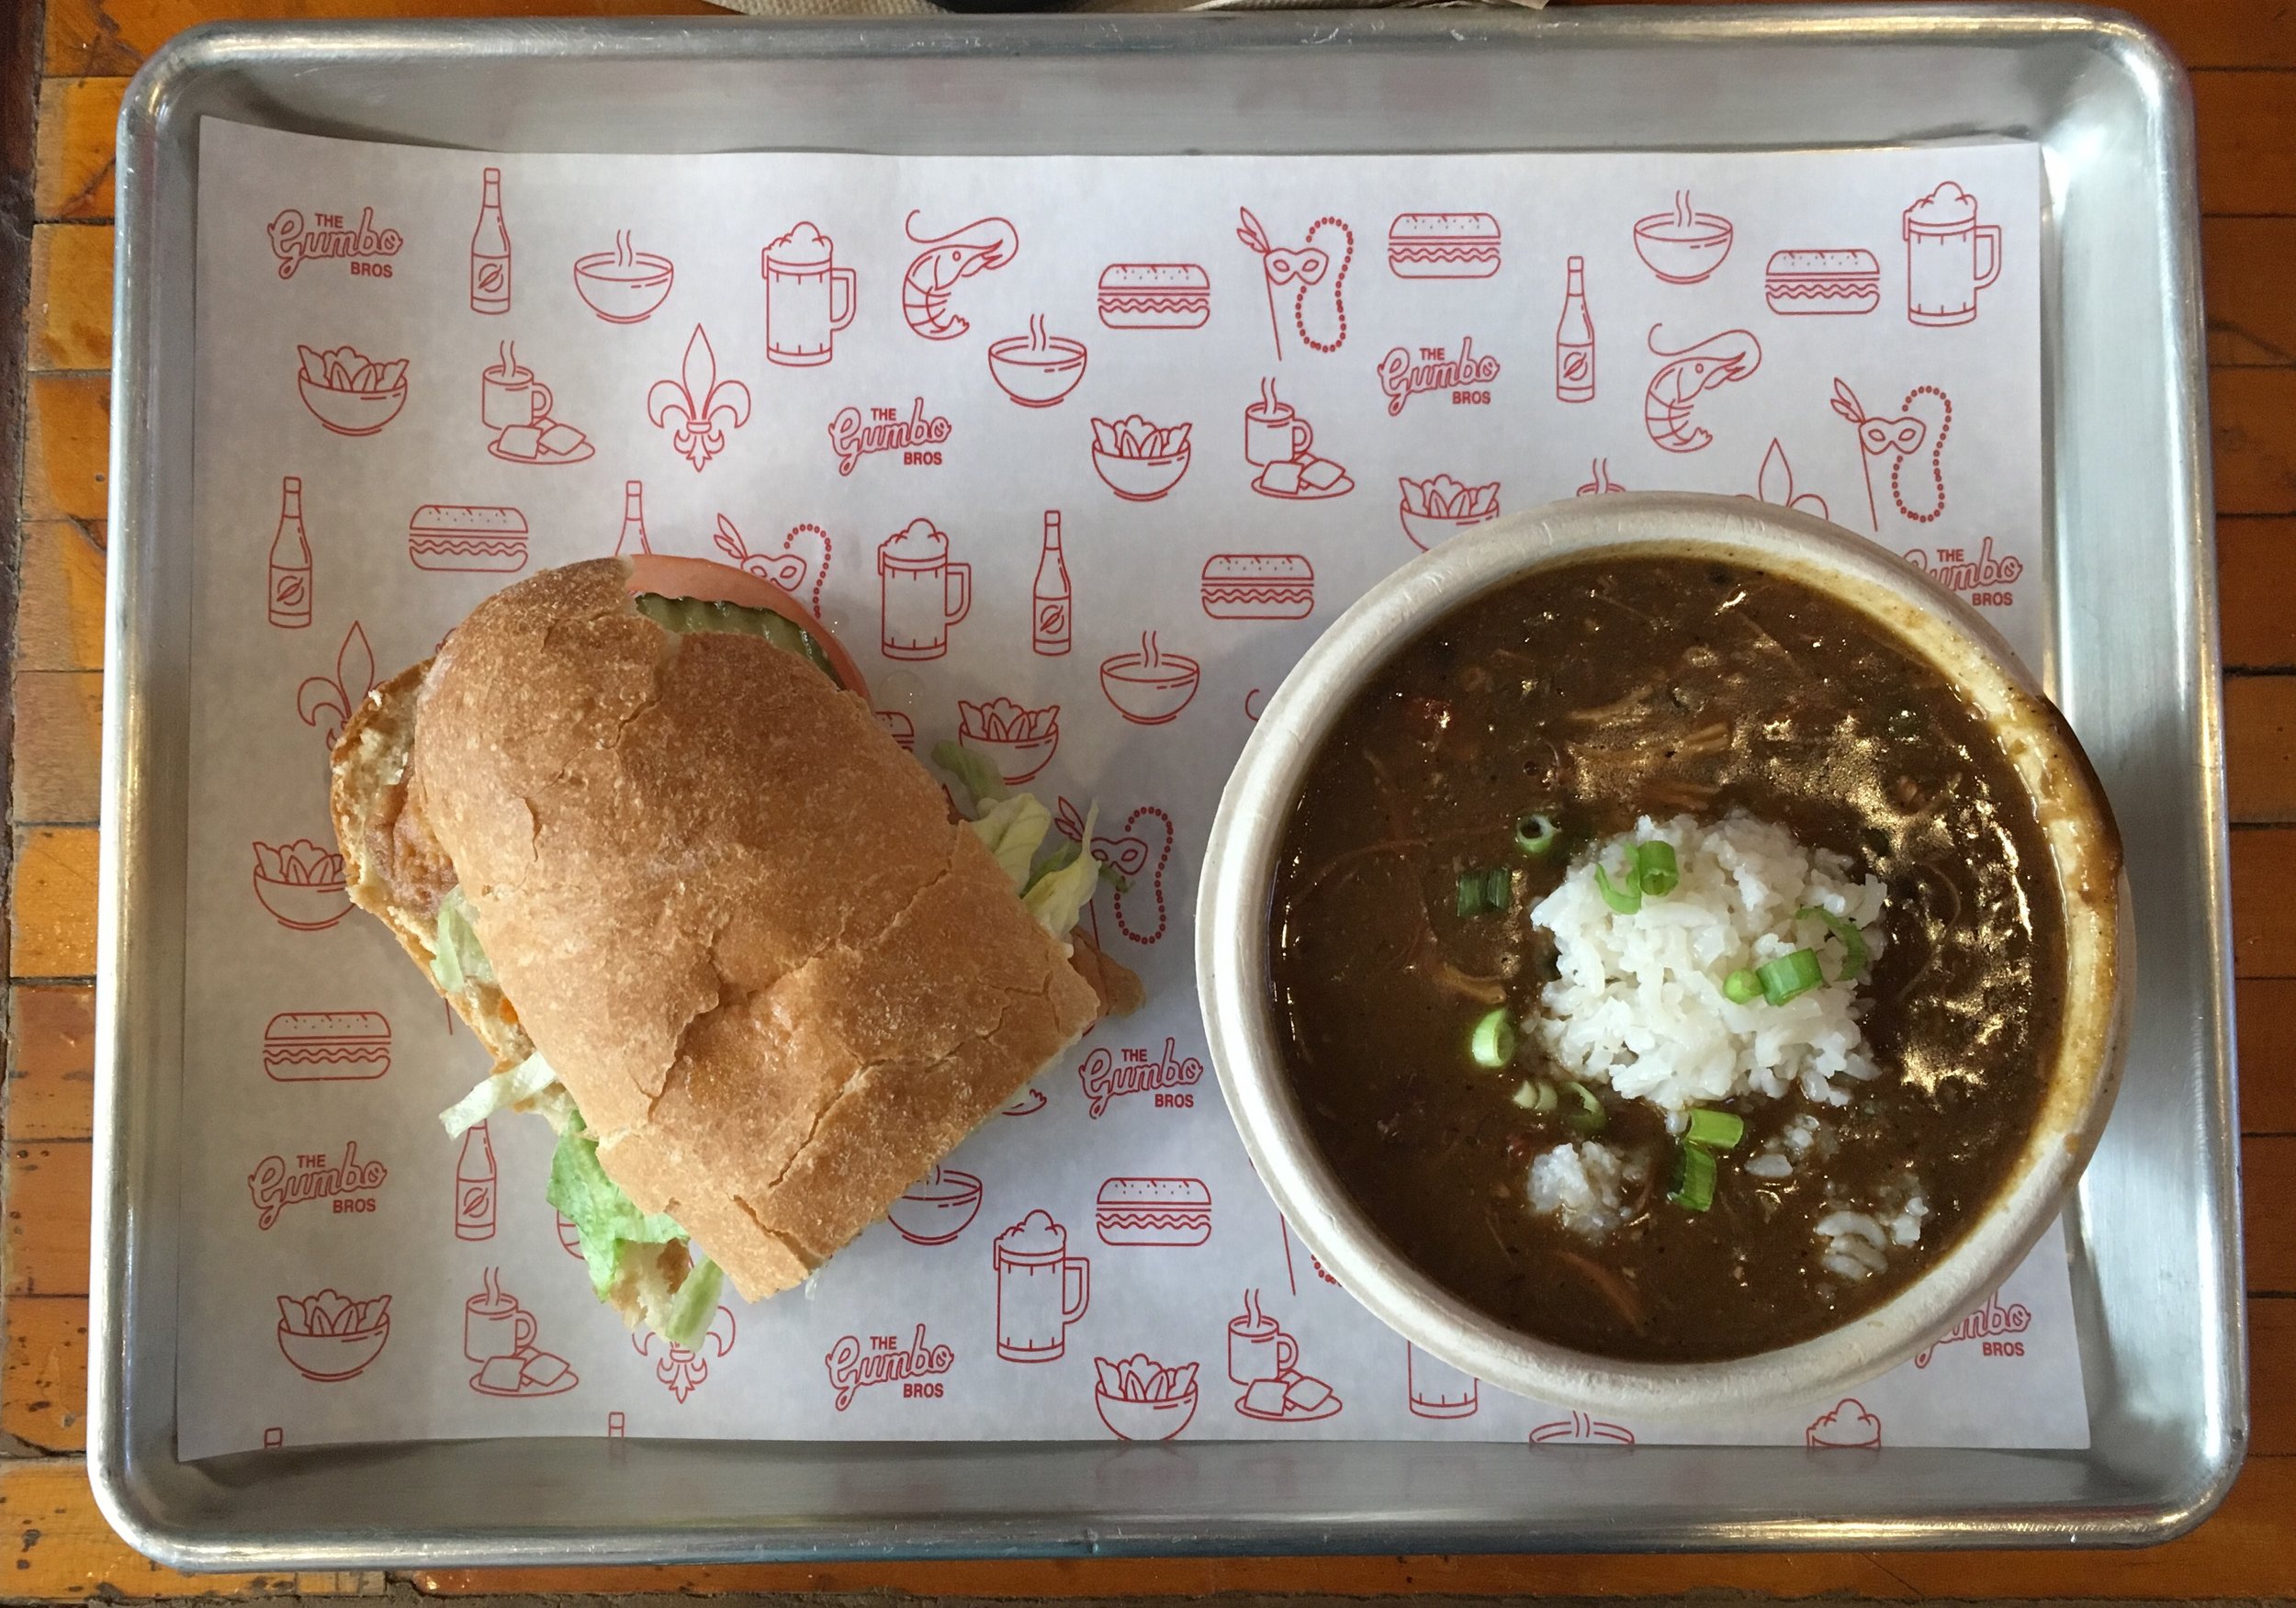 Po' Boy and Gumbo lunch special